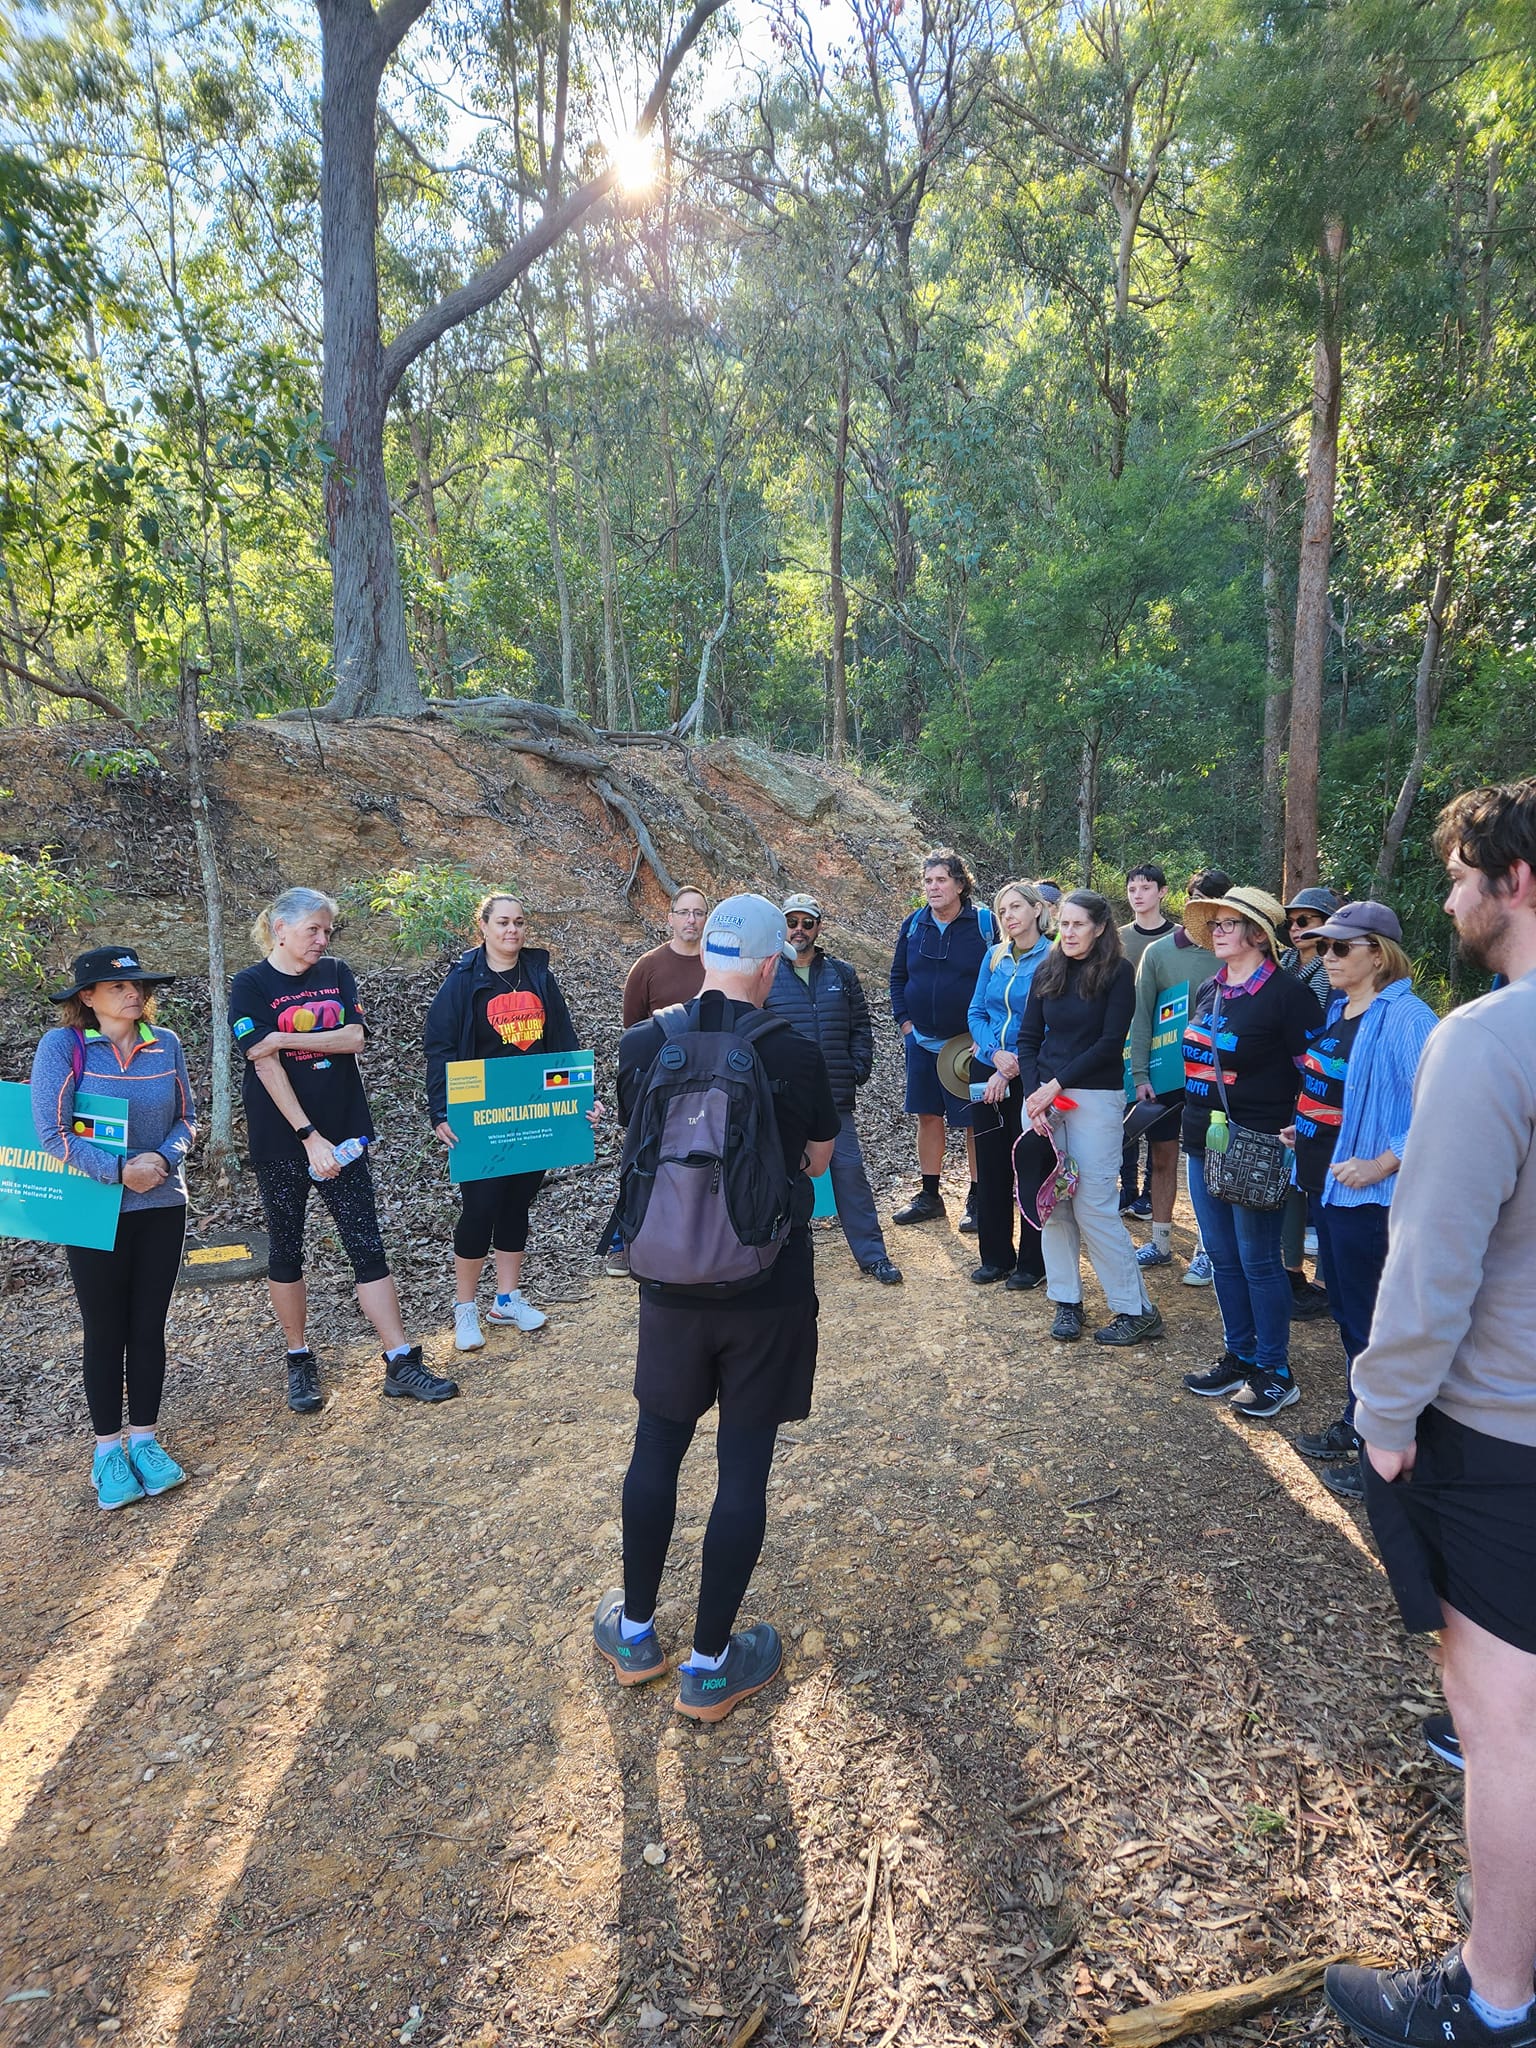 Walking from Mt. Gravatt summit for reconciliation with the Greenslopes Reconciliation Action Group